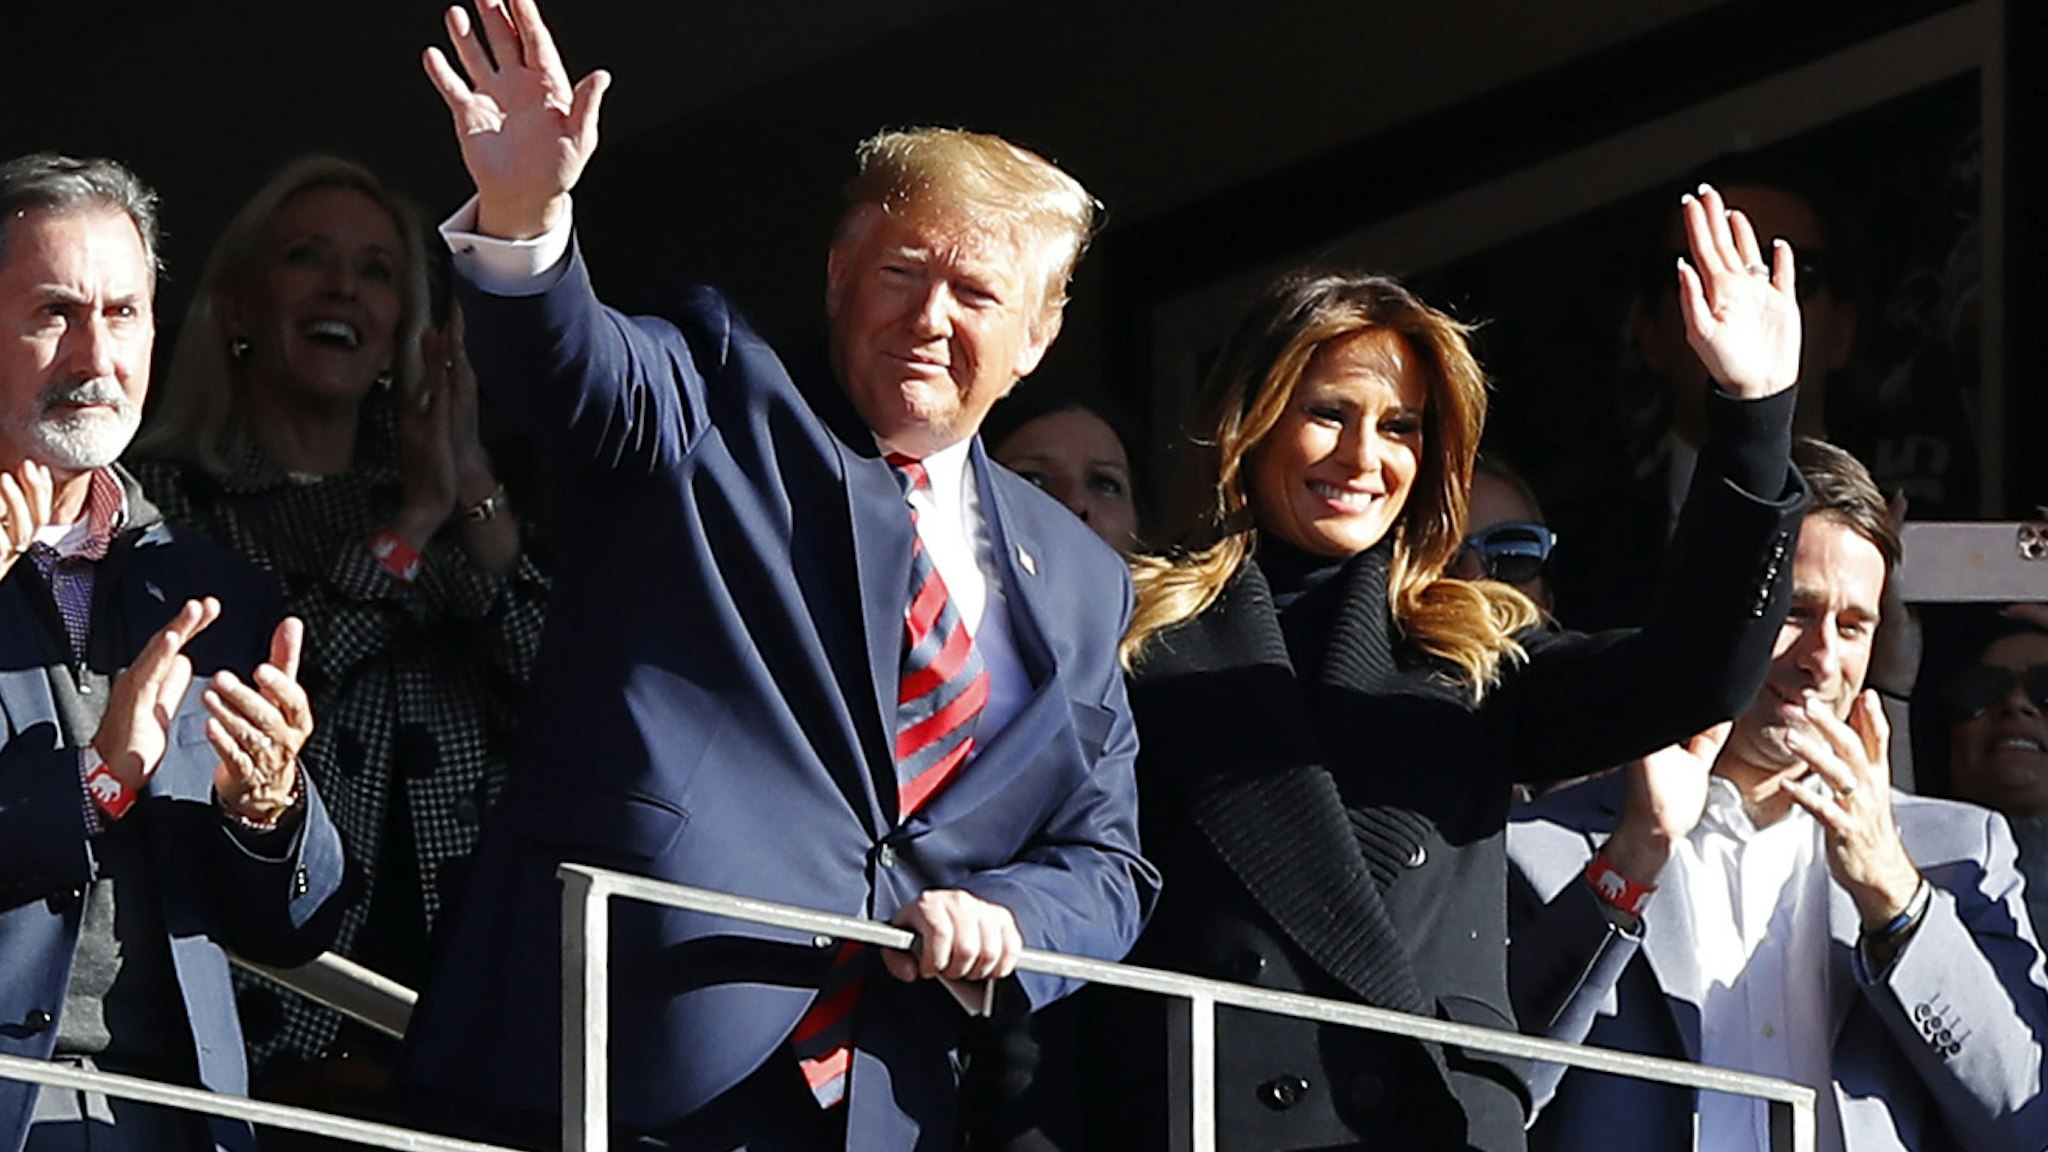 TUSCALOOSA, ALABAMA - NOVEMBER 09: President Donald Trump and first lady Melania Trump attend the game between the LSU Tigers and the Alabama Crimson Tide at Bryant-Denny Stadium on November 09, 2019 in Tuscaloosa, Alabama. (Photo by Kevin C. Cox/Getty Images)